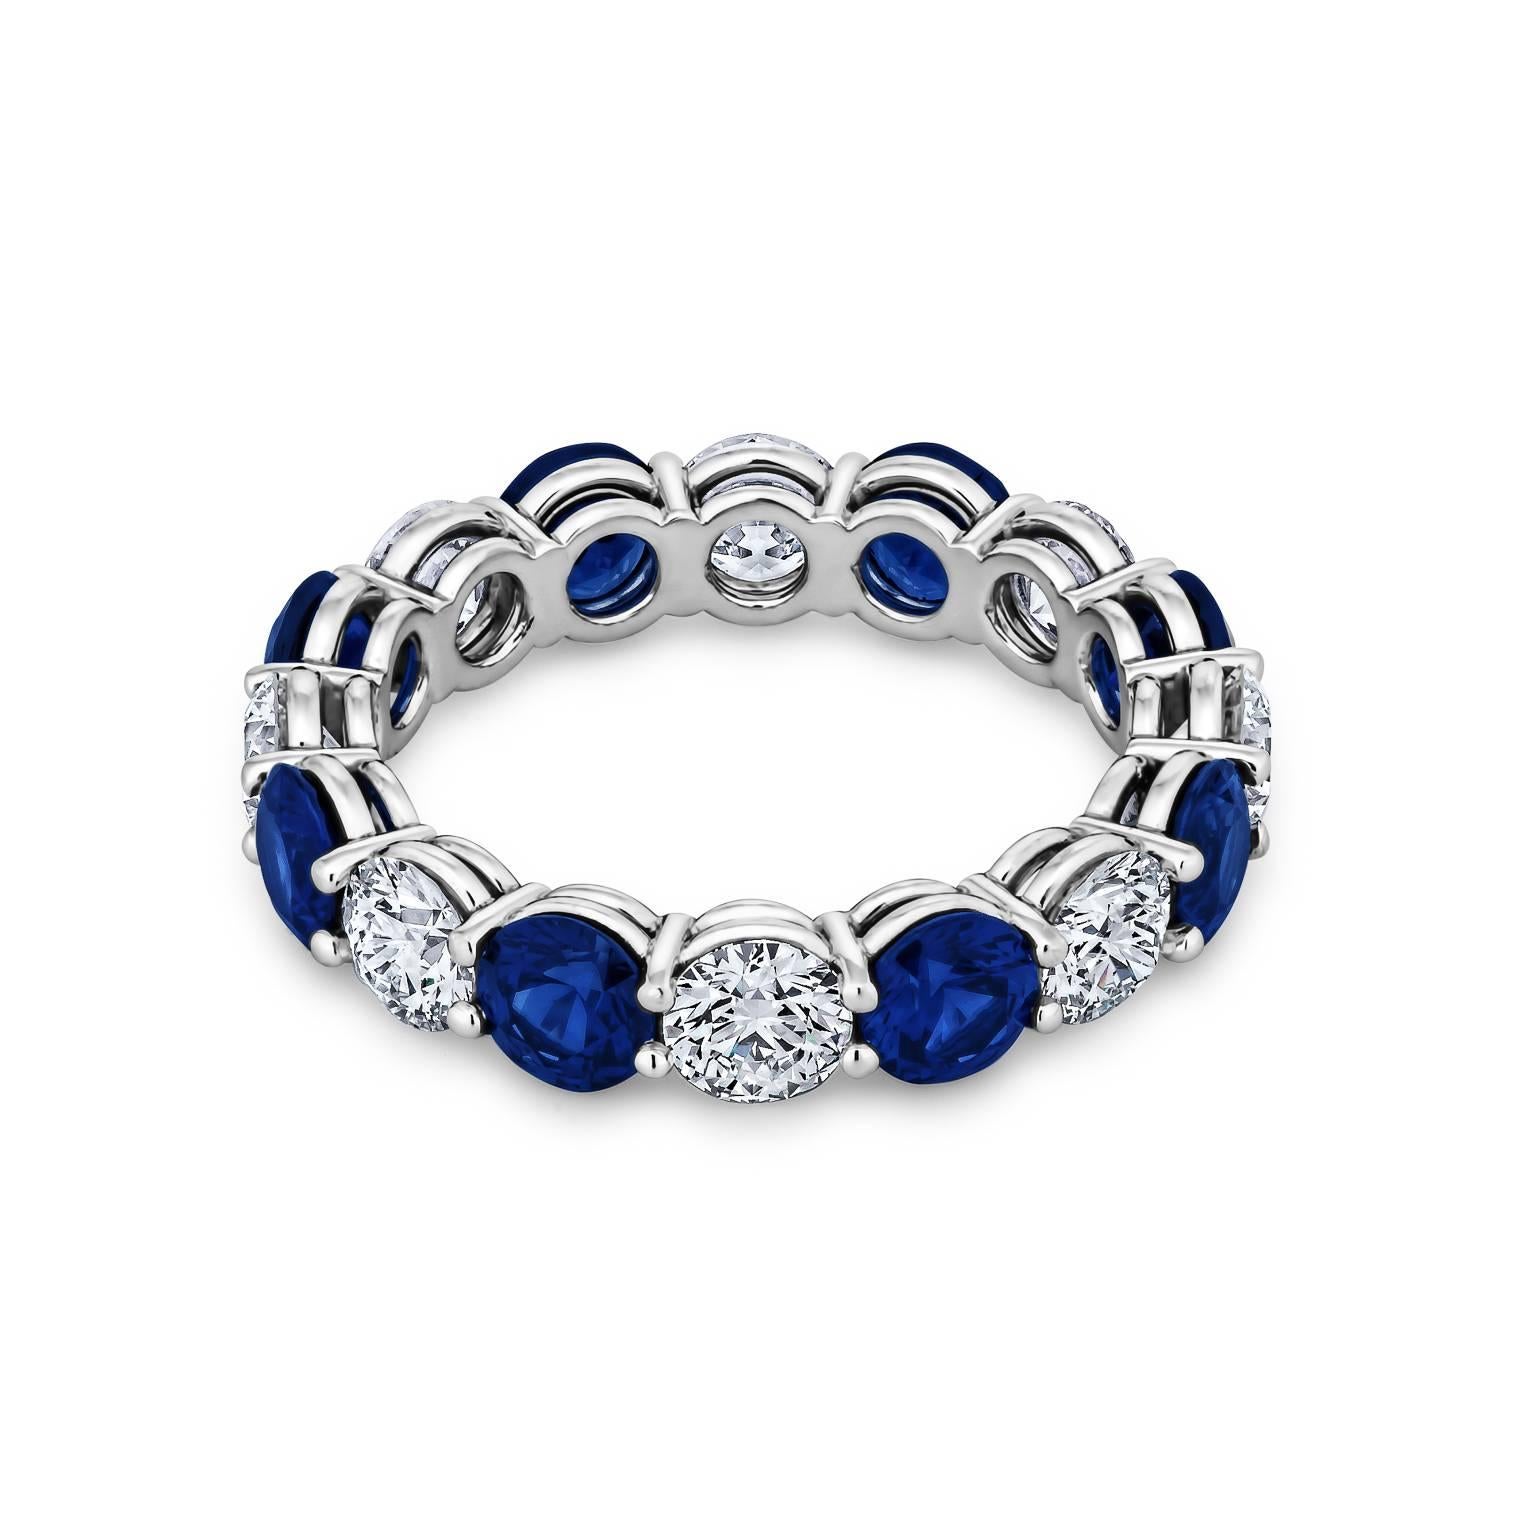 Handmade round ideal cut diamond and sapphire platinum shared prong band ring.  Designed by Steven Fox.  Total diamond weight 2.01 carats.  D-E color/VVS clarity.  Total Sapphire weight 2.72 carats.  Size 6.  Can be custom ordered to size.    